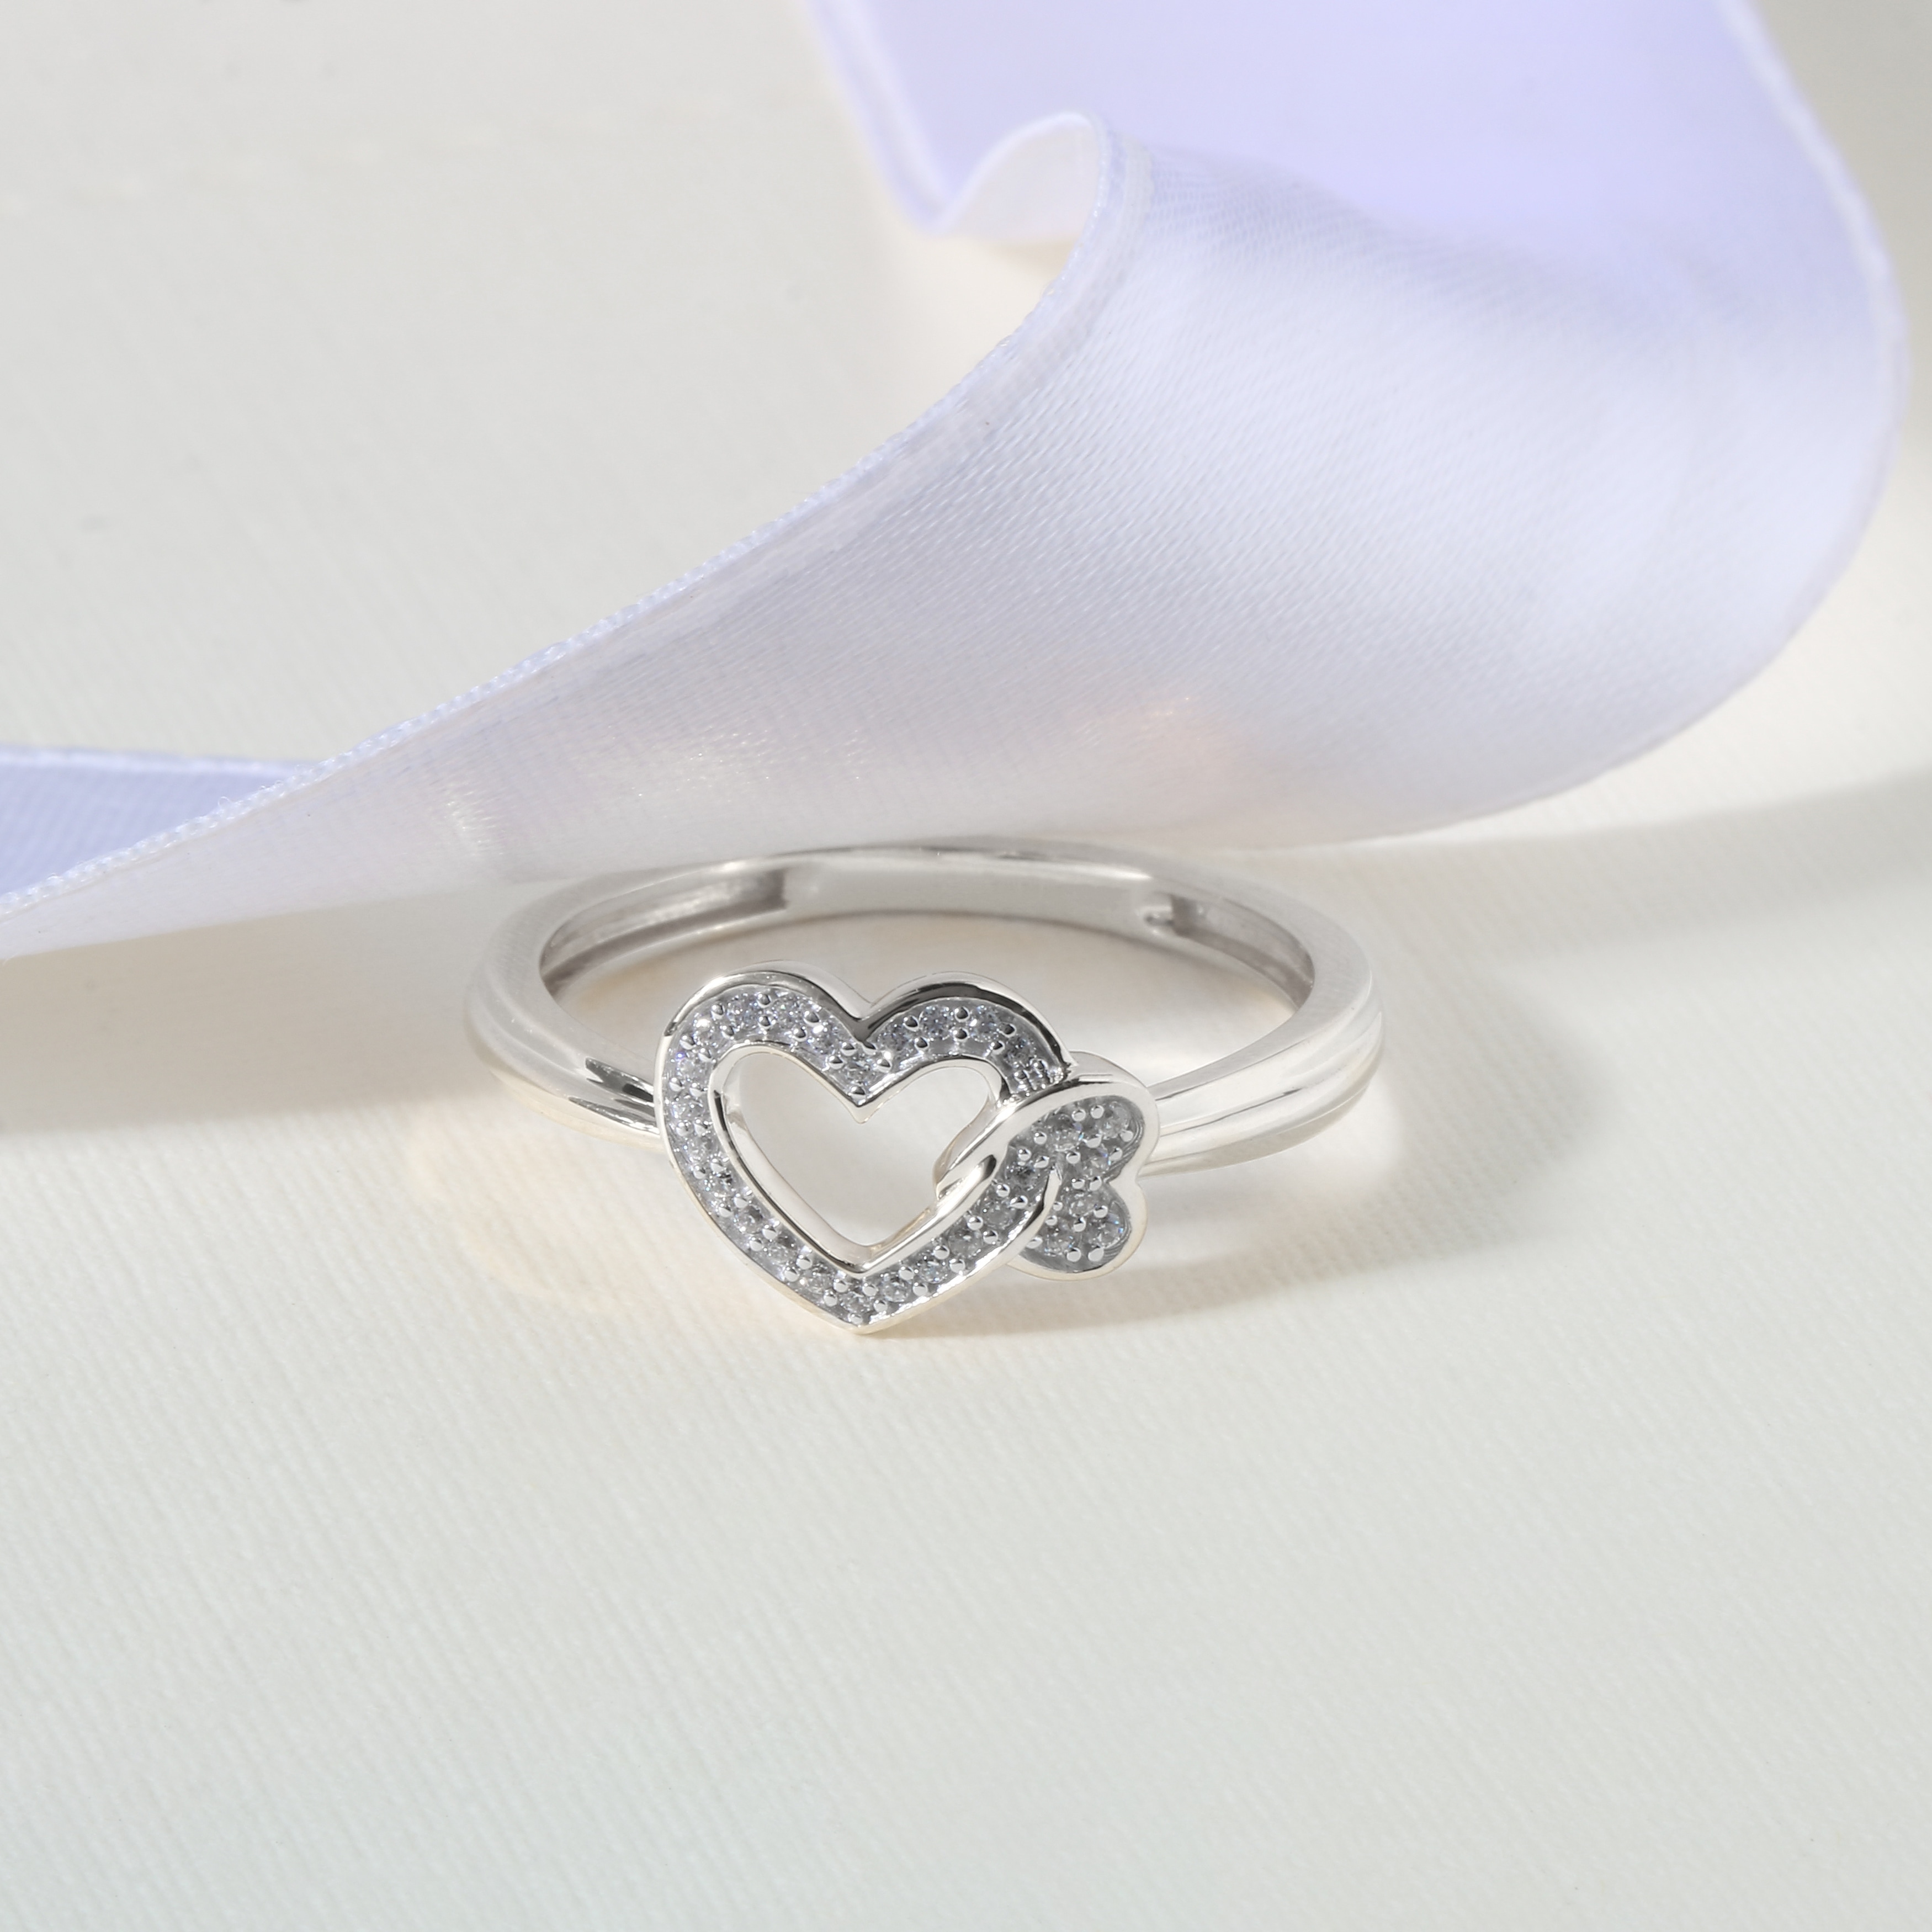 925 Silver hearts entwined ring size Q 1/2  Free Gift Bag